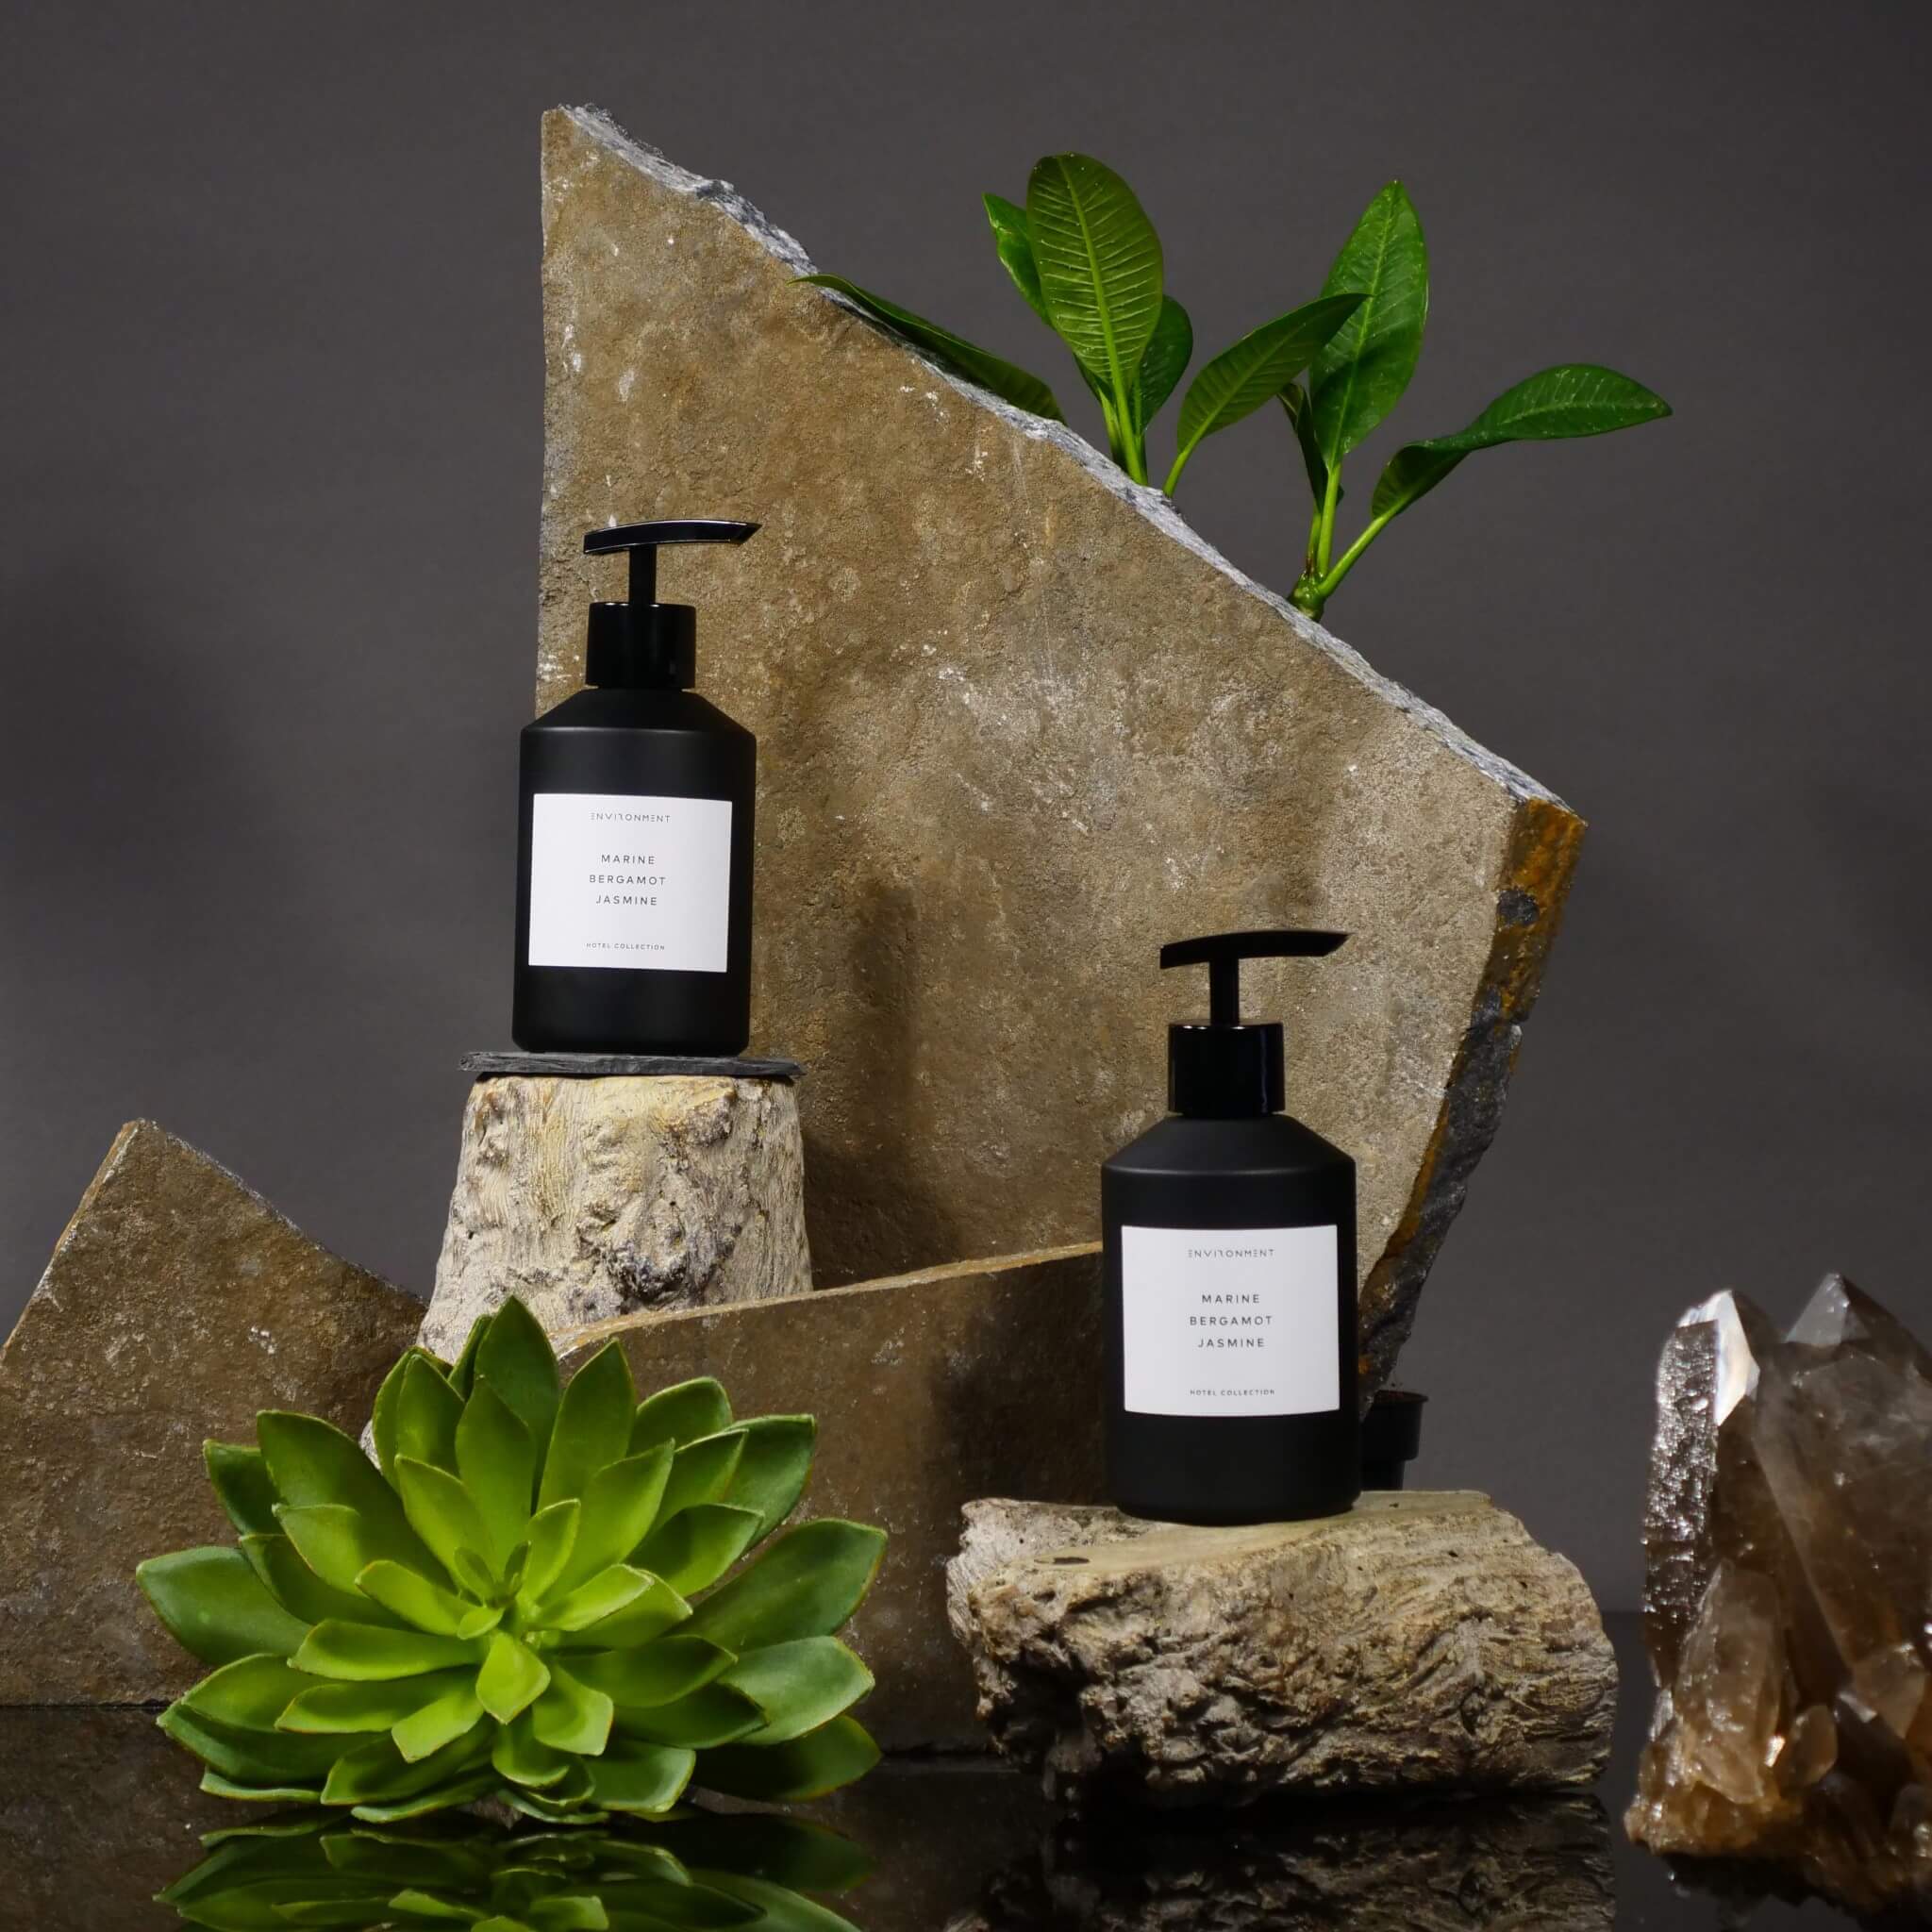 Damask Rose | Vetiver | Guaiac Wood Hand Soap (Inspired by Le Labo Rose 31® and Fairmont Hotel®)